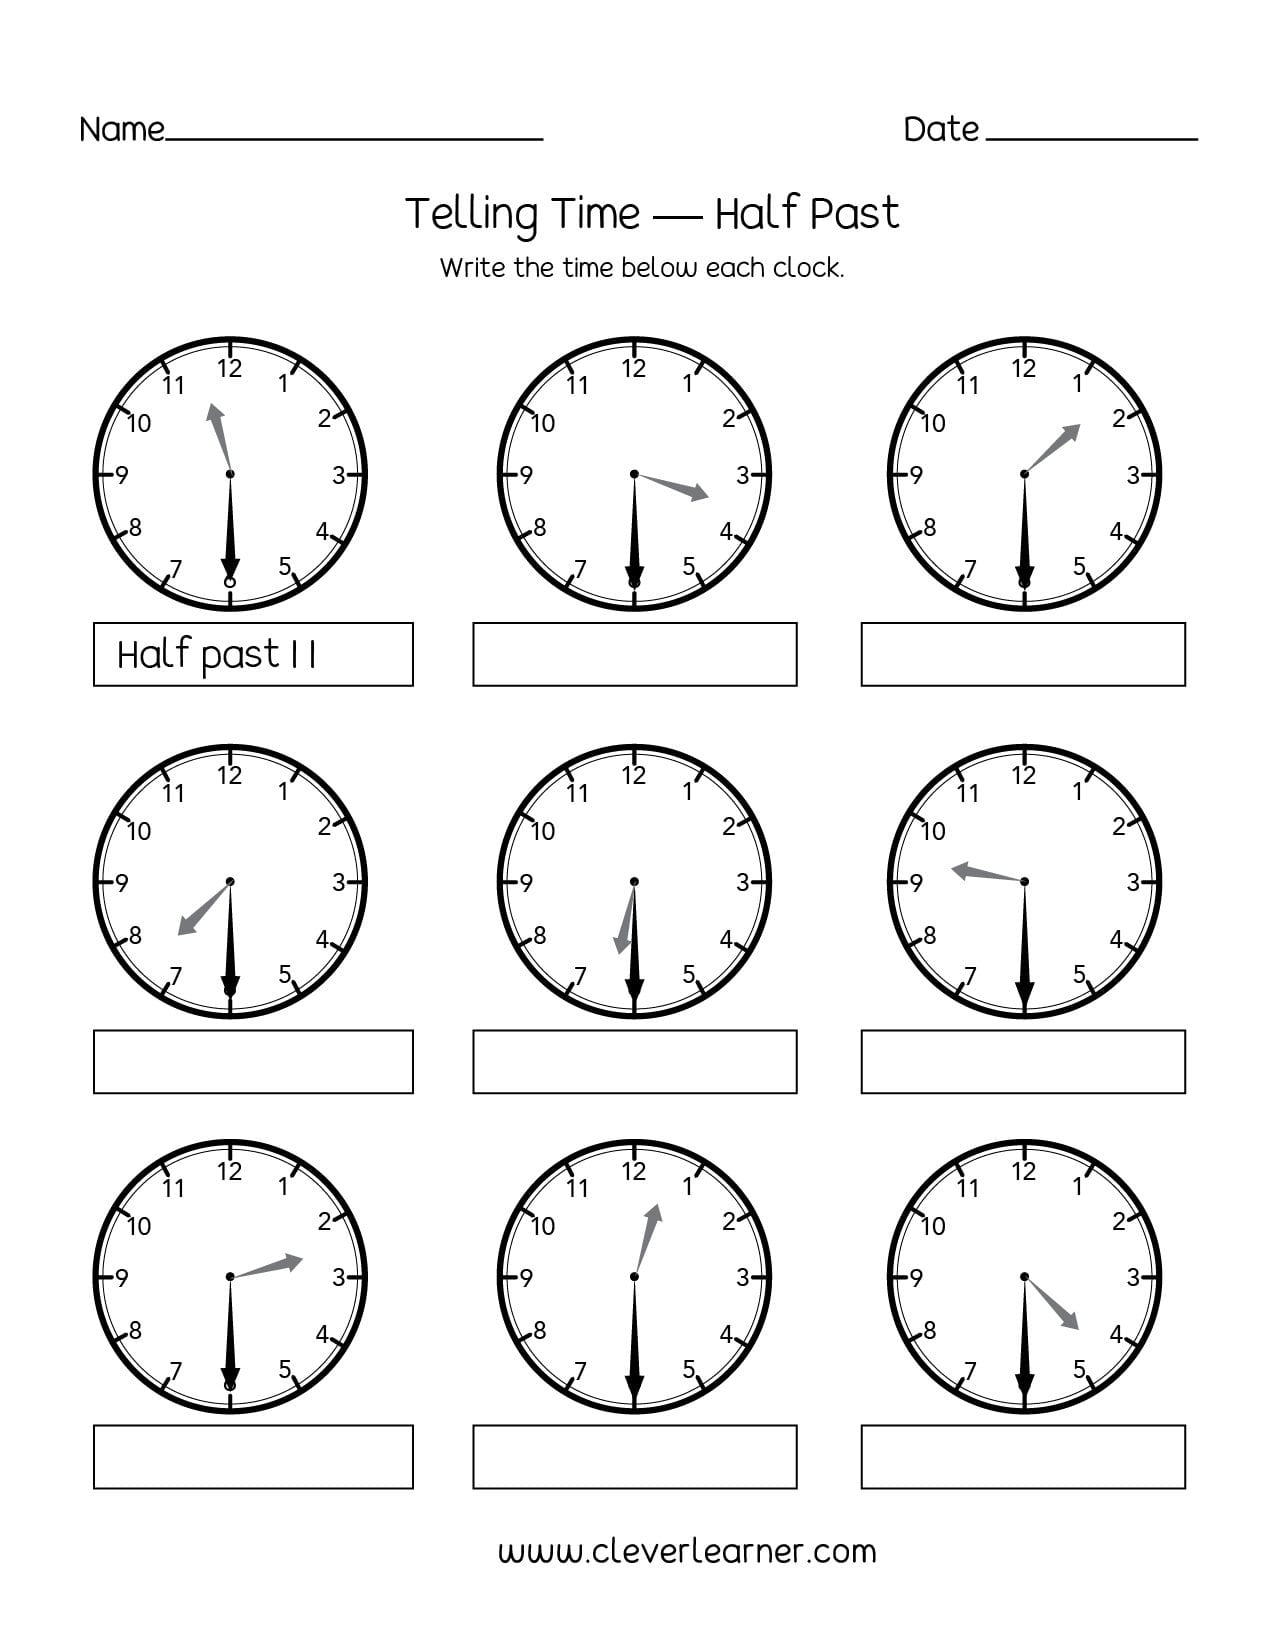 tell-time-half-past-worksheets-for-autistic-kids-telling-time-worksheets